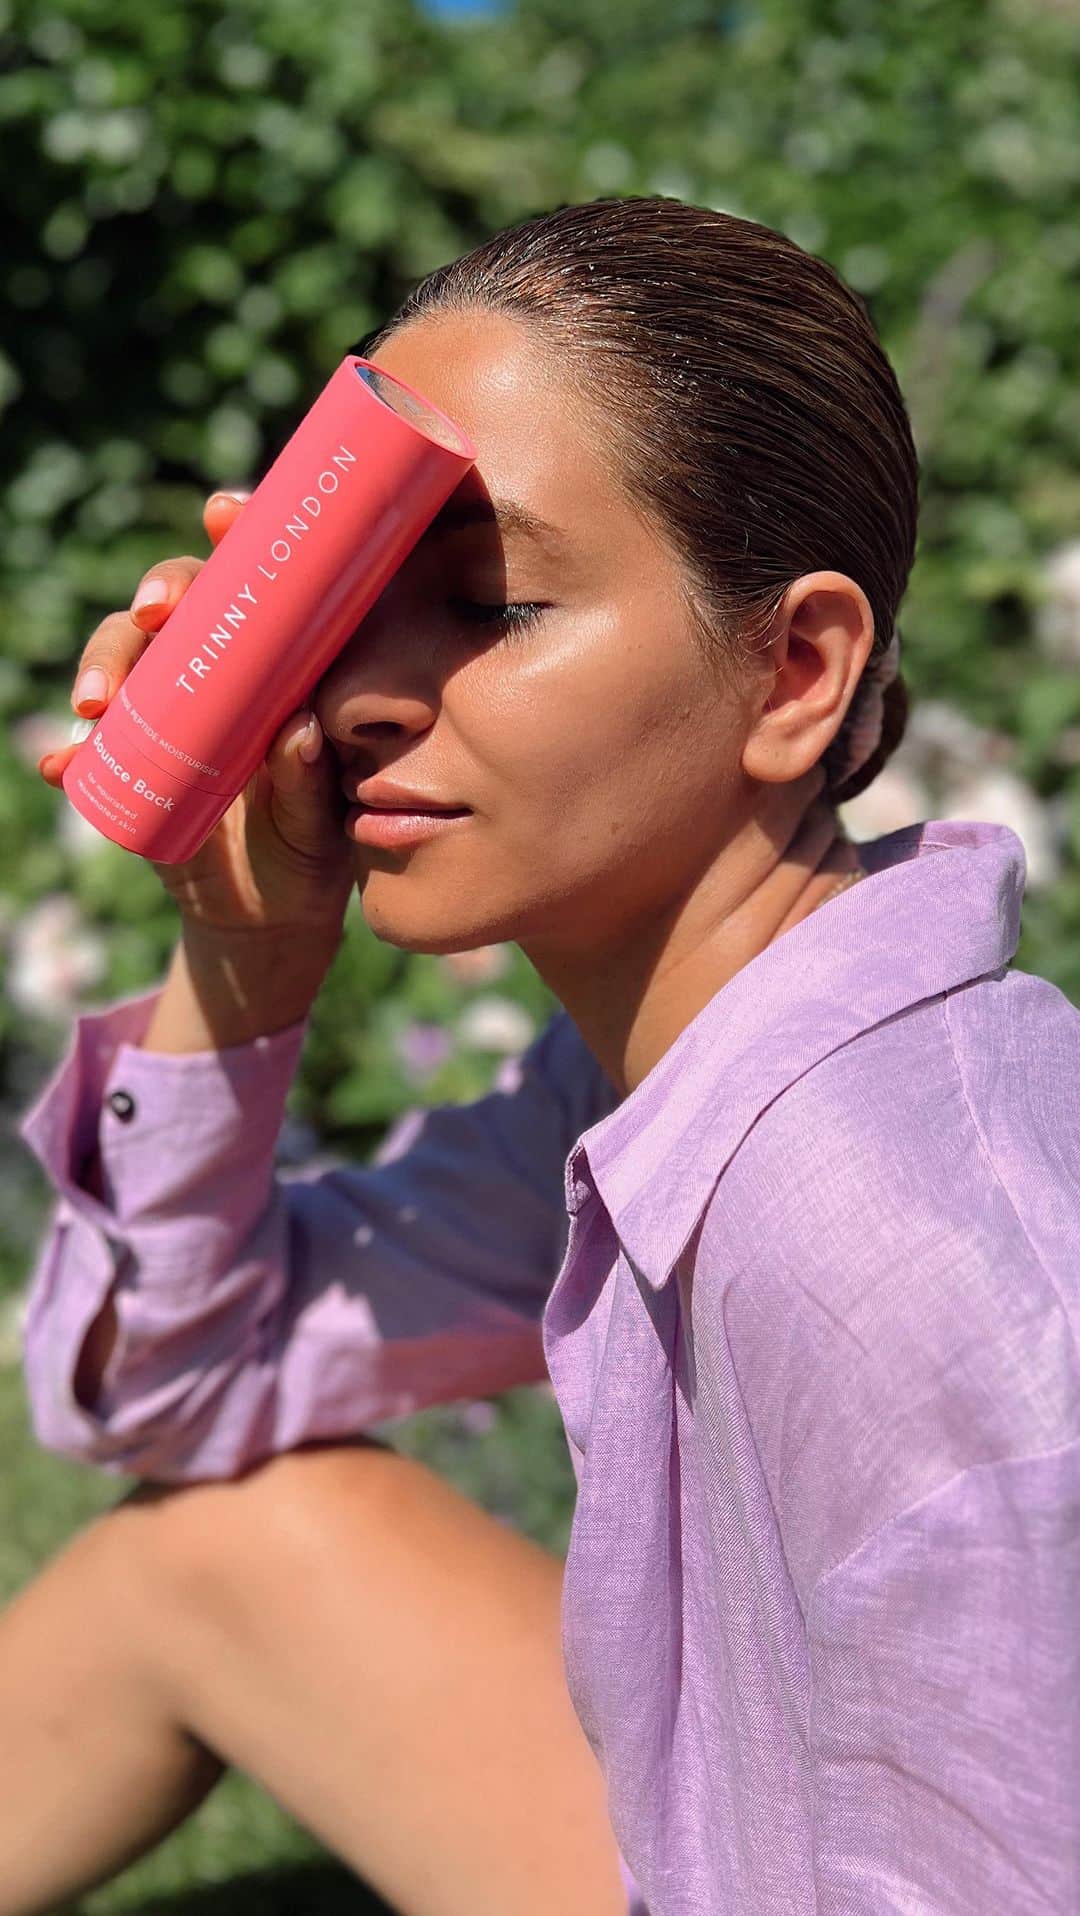 Sarah Angiusのインスタグラム：「AD my skin has been looking it’s best lately so I’m sharing my current favorite Trinny London products with you that I’ve been using for quite some time now. #TrinnyLondon  Products:   Cleanser: Be Your Best  Exfoliate: Toptoe In  Serum: Plump Up  Moisturiser: Bounce Back」